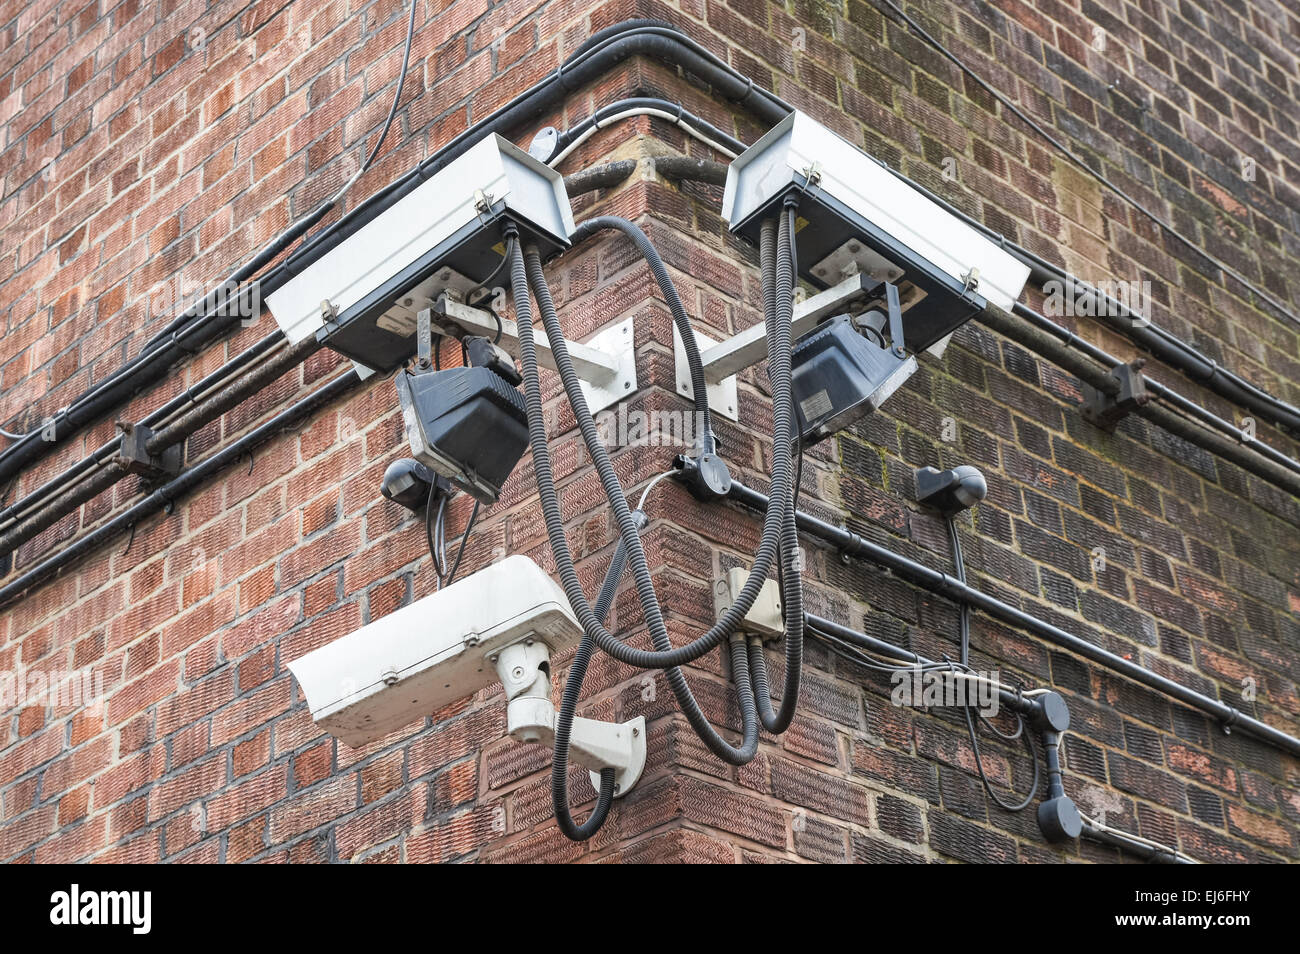 CCTV security cameras mounted on a wall of a building, London England  United Kingdom UK Stock Photo - Alamy